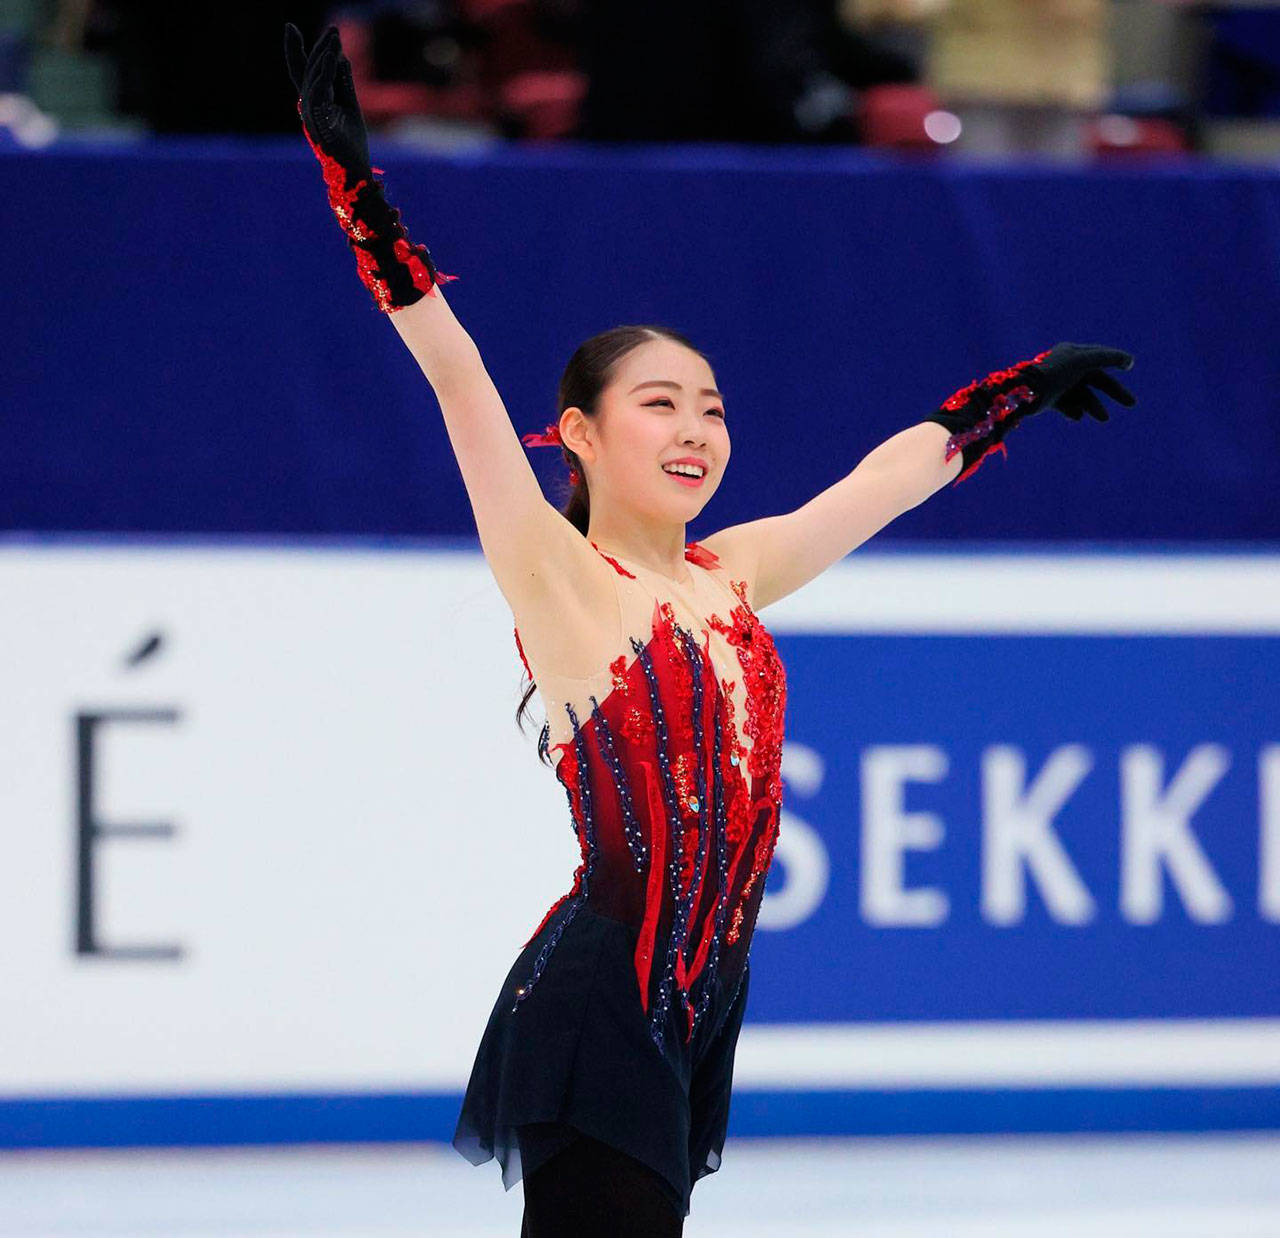 Rika Kihira of Japan, seen here in February, skated to Jennifer Thomas and Kimberly “The Rogue Pianist” StarKey’s “The Fire Within” at the 2021 World Championships. The short routine earned her second place and seventh overall along with a spot for Japan at the 2022 World Championships. Facebook profile photo